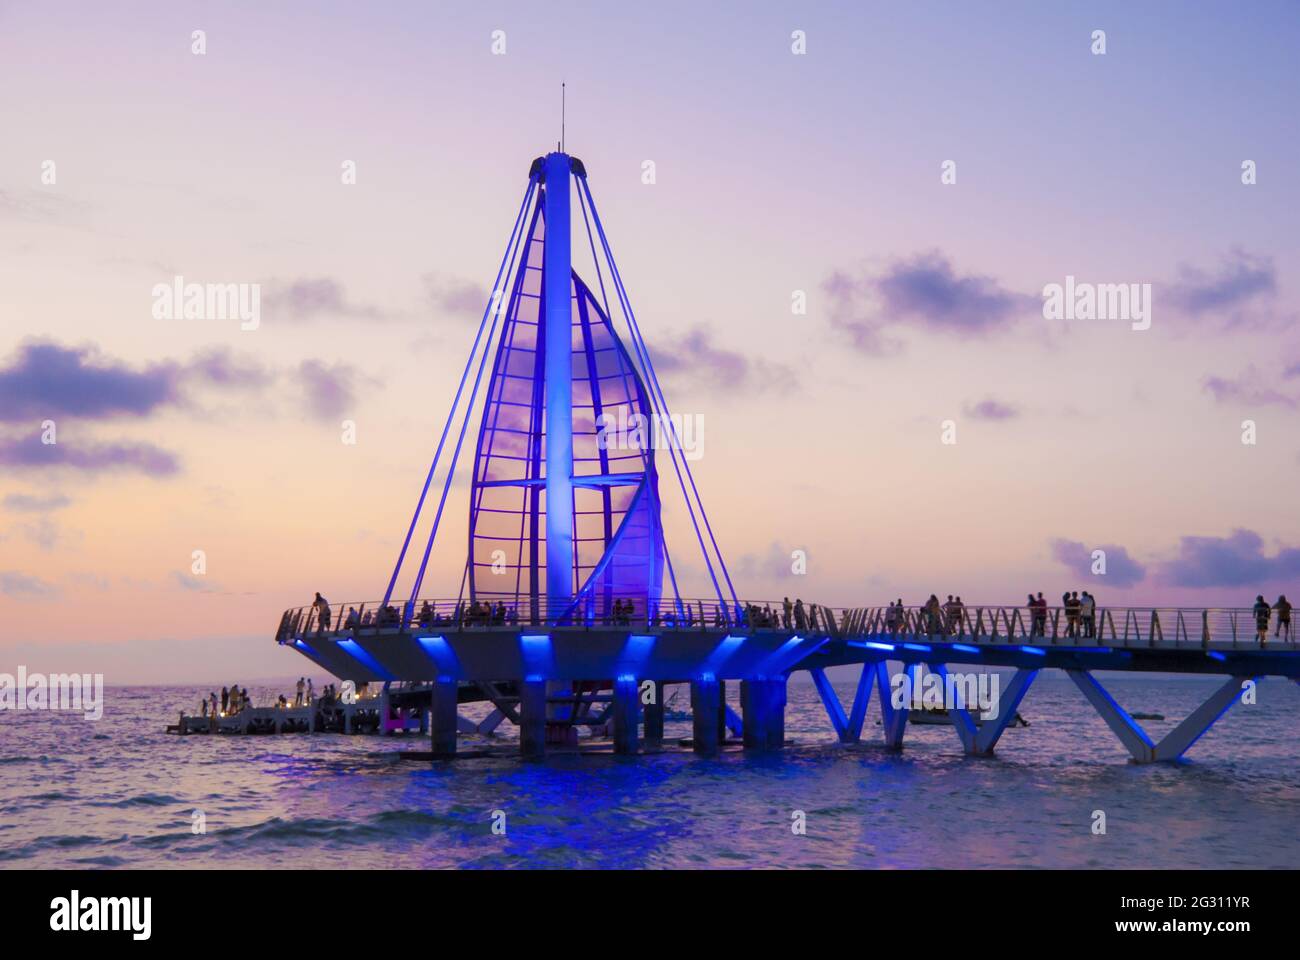 Sail sculpture and pier change colors at night - inaugurated in 2013 and designed by Mexican architect Jesus Torres Vega, the pier features a surface Stock Photo